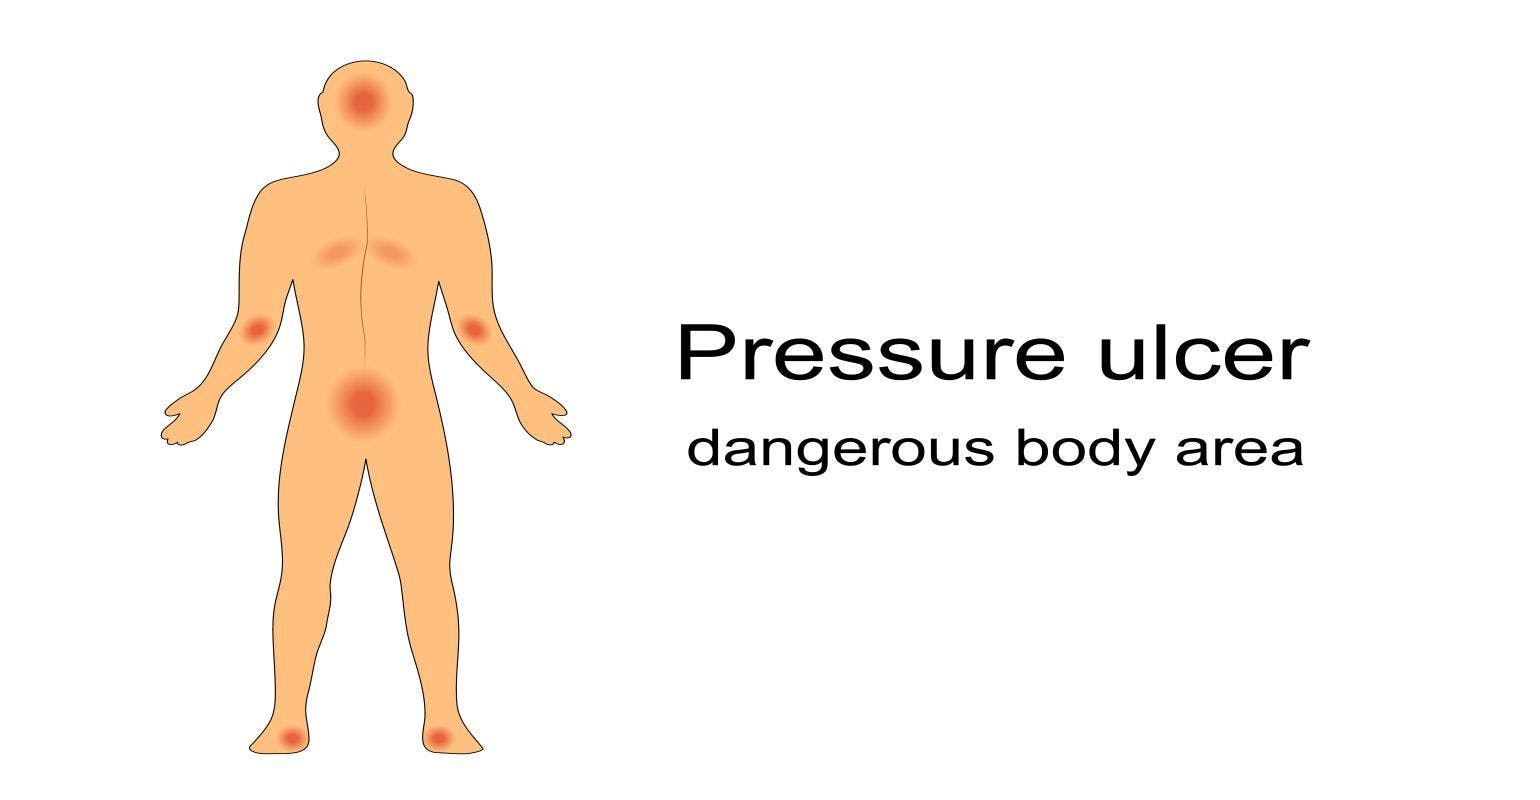 Efforts to Prevent Pressure Ulcers in Hospital Patients May Not be Making Headway on the Worst Kind